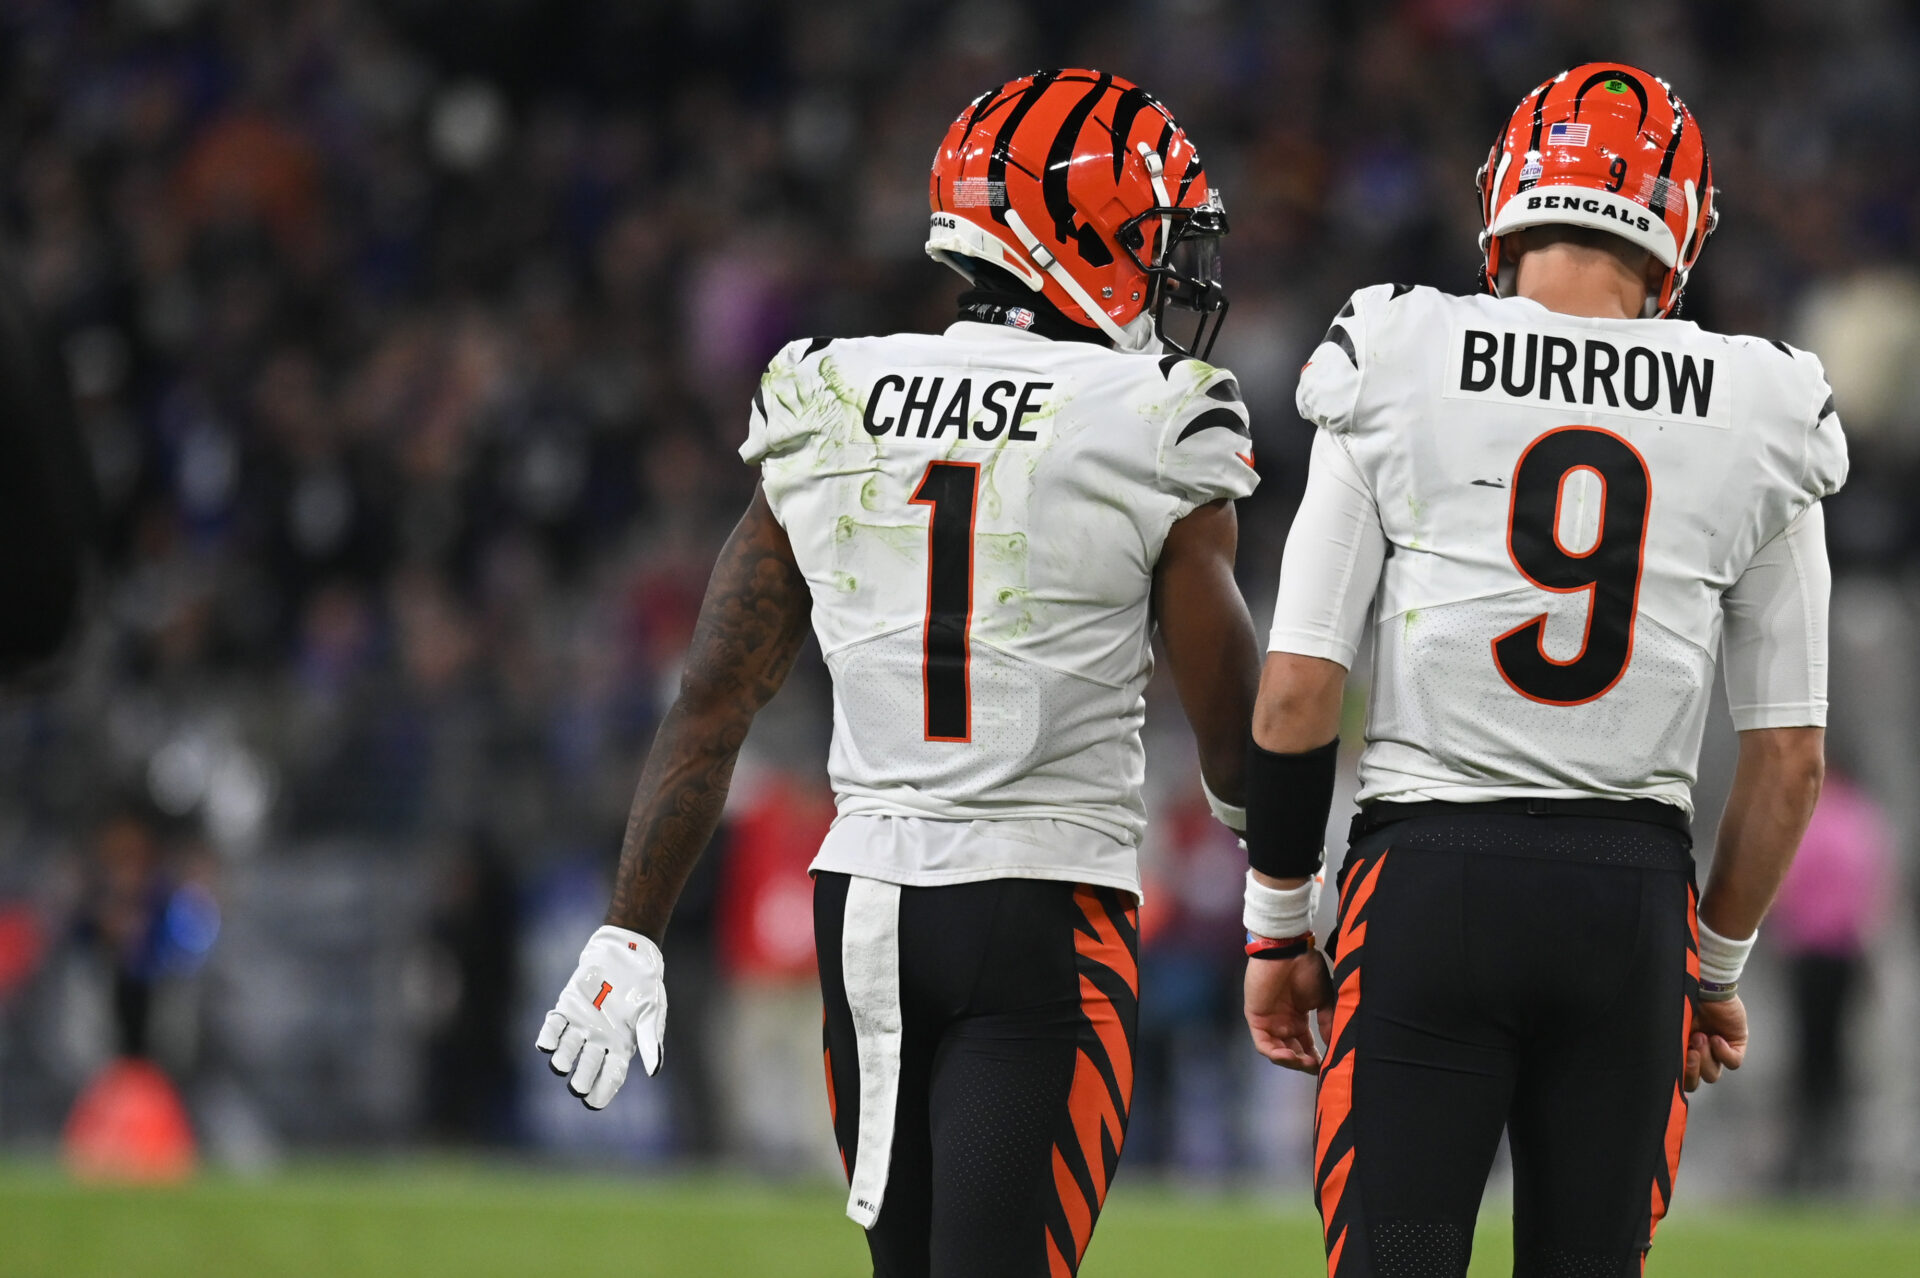 Burrow and Chase